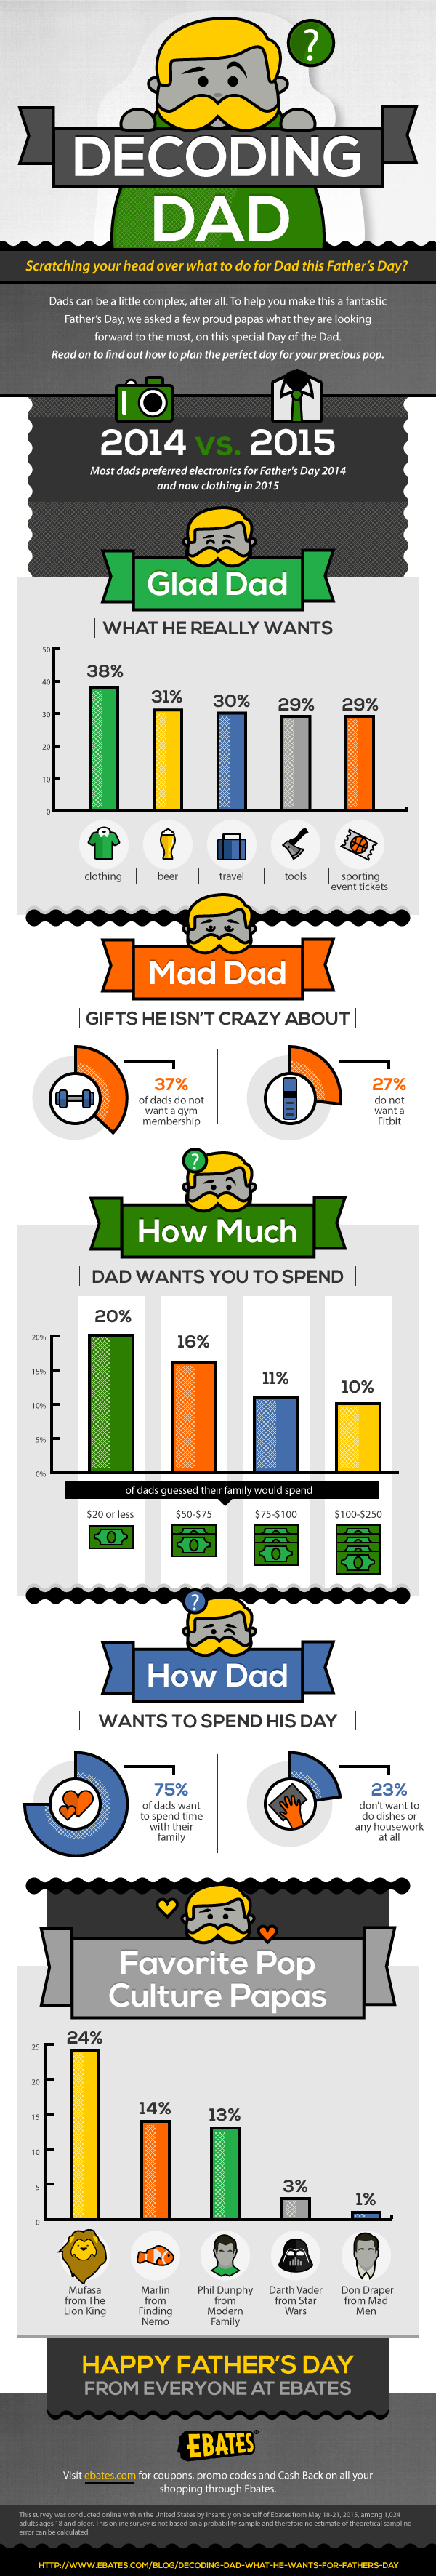 Decoding Dad: What He Wants for Father's Day